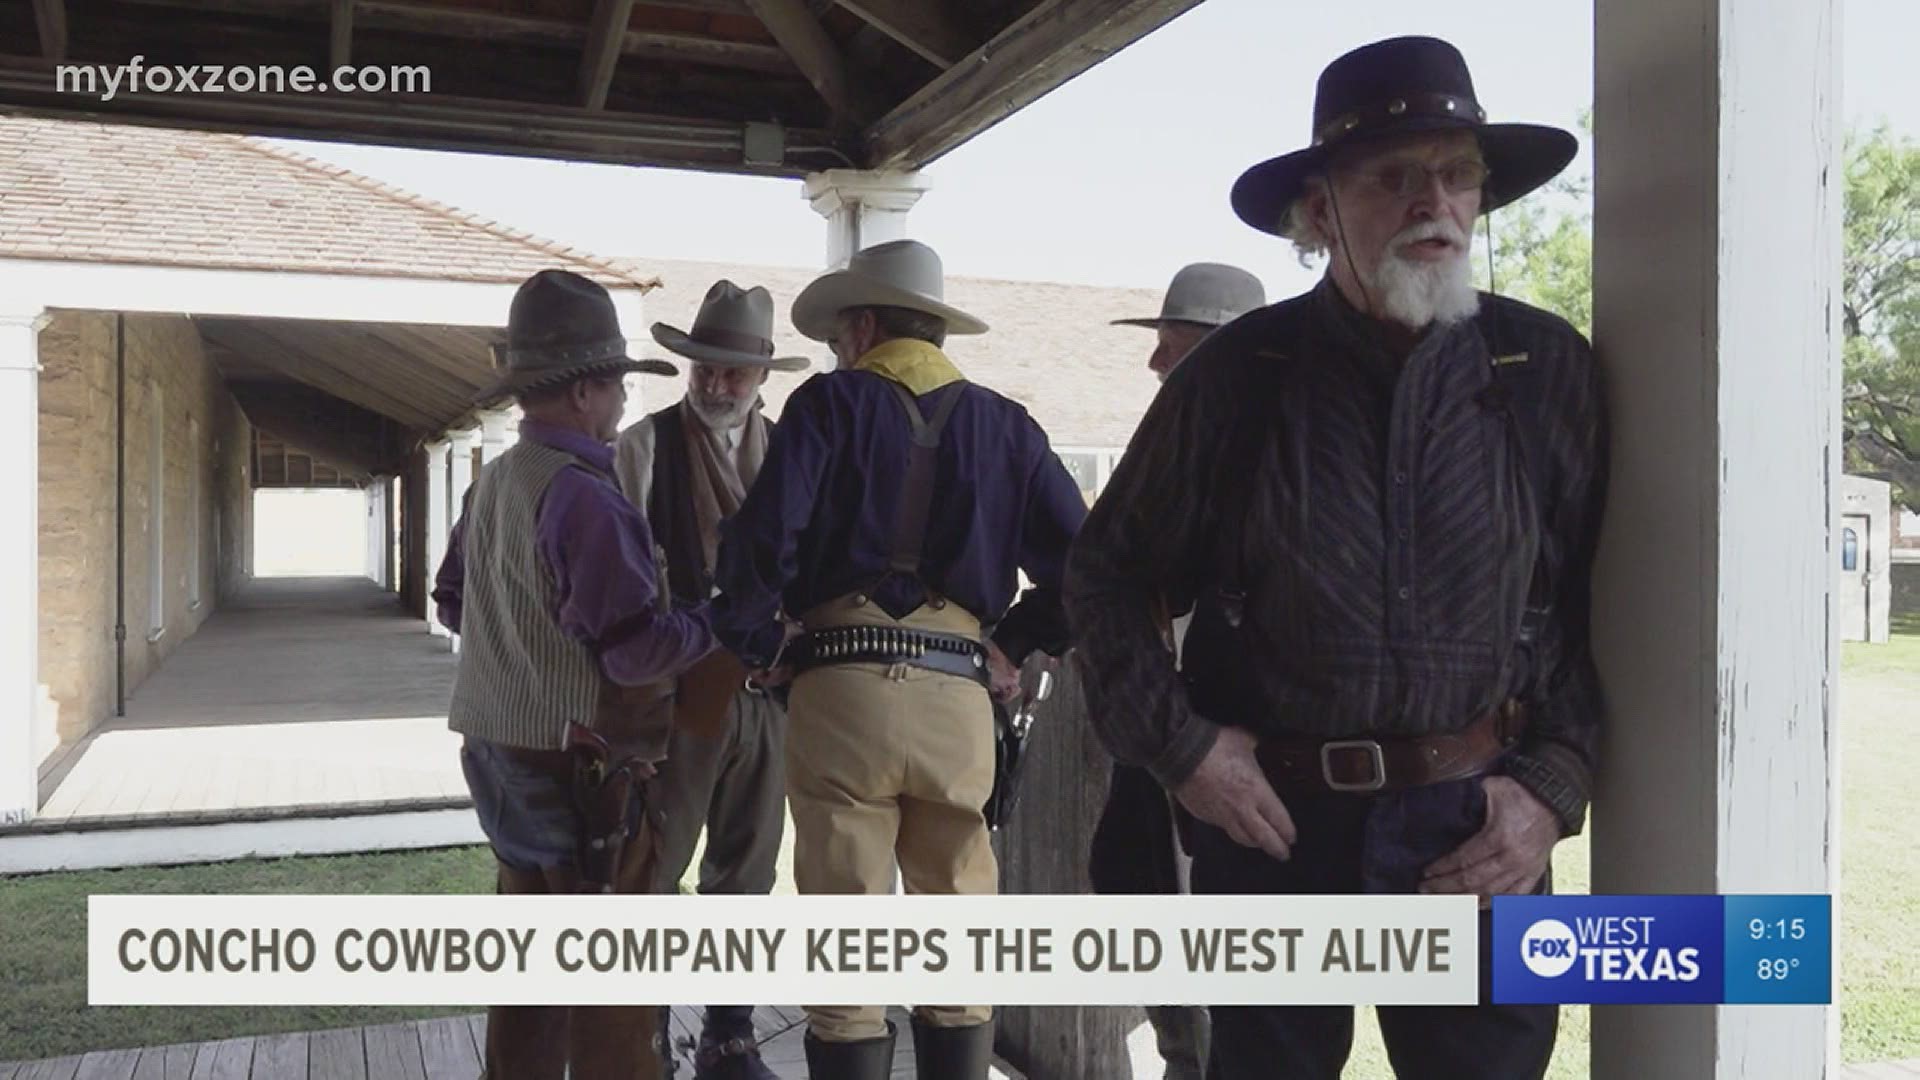 The acting troupe says they work to draw people to Fort Concho to learn the history of the area.